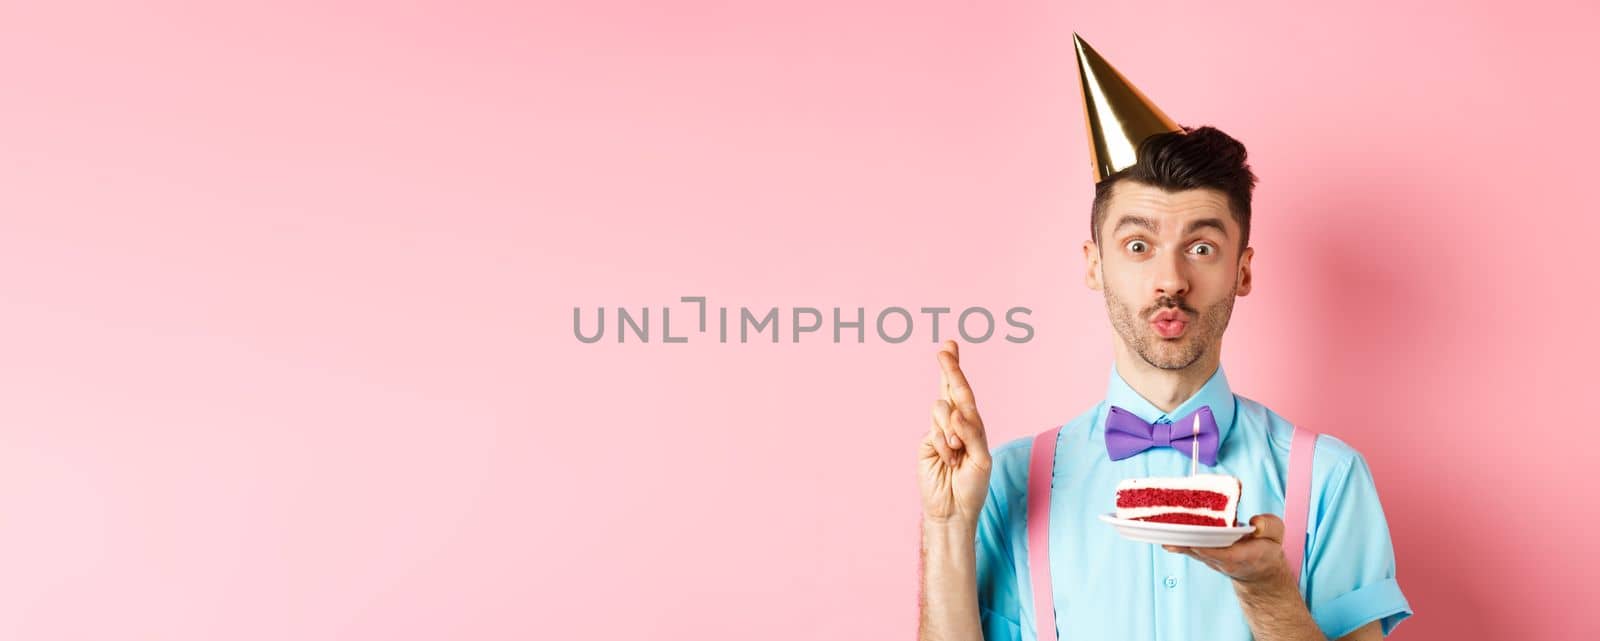 Holidays and celebration concept. Cute and funny man making birthday wish with crossed fingers, holding b-day cake and looking dreamy at camera, pink background.